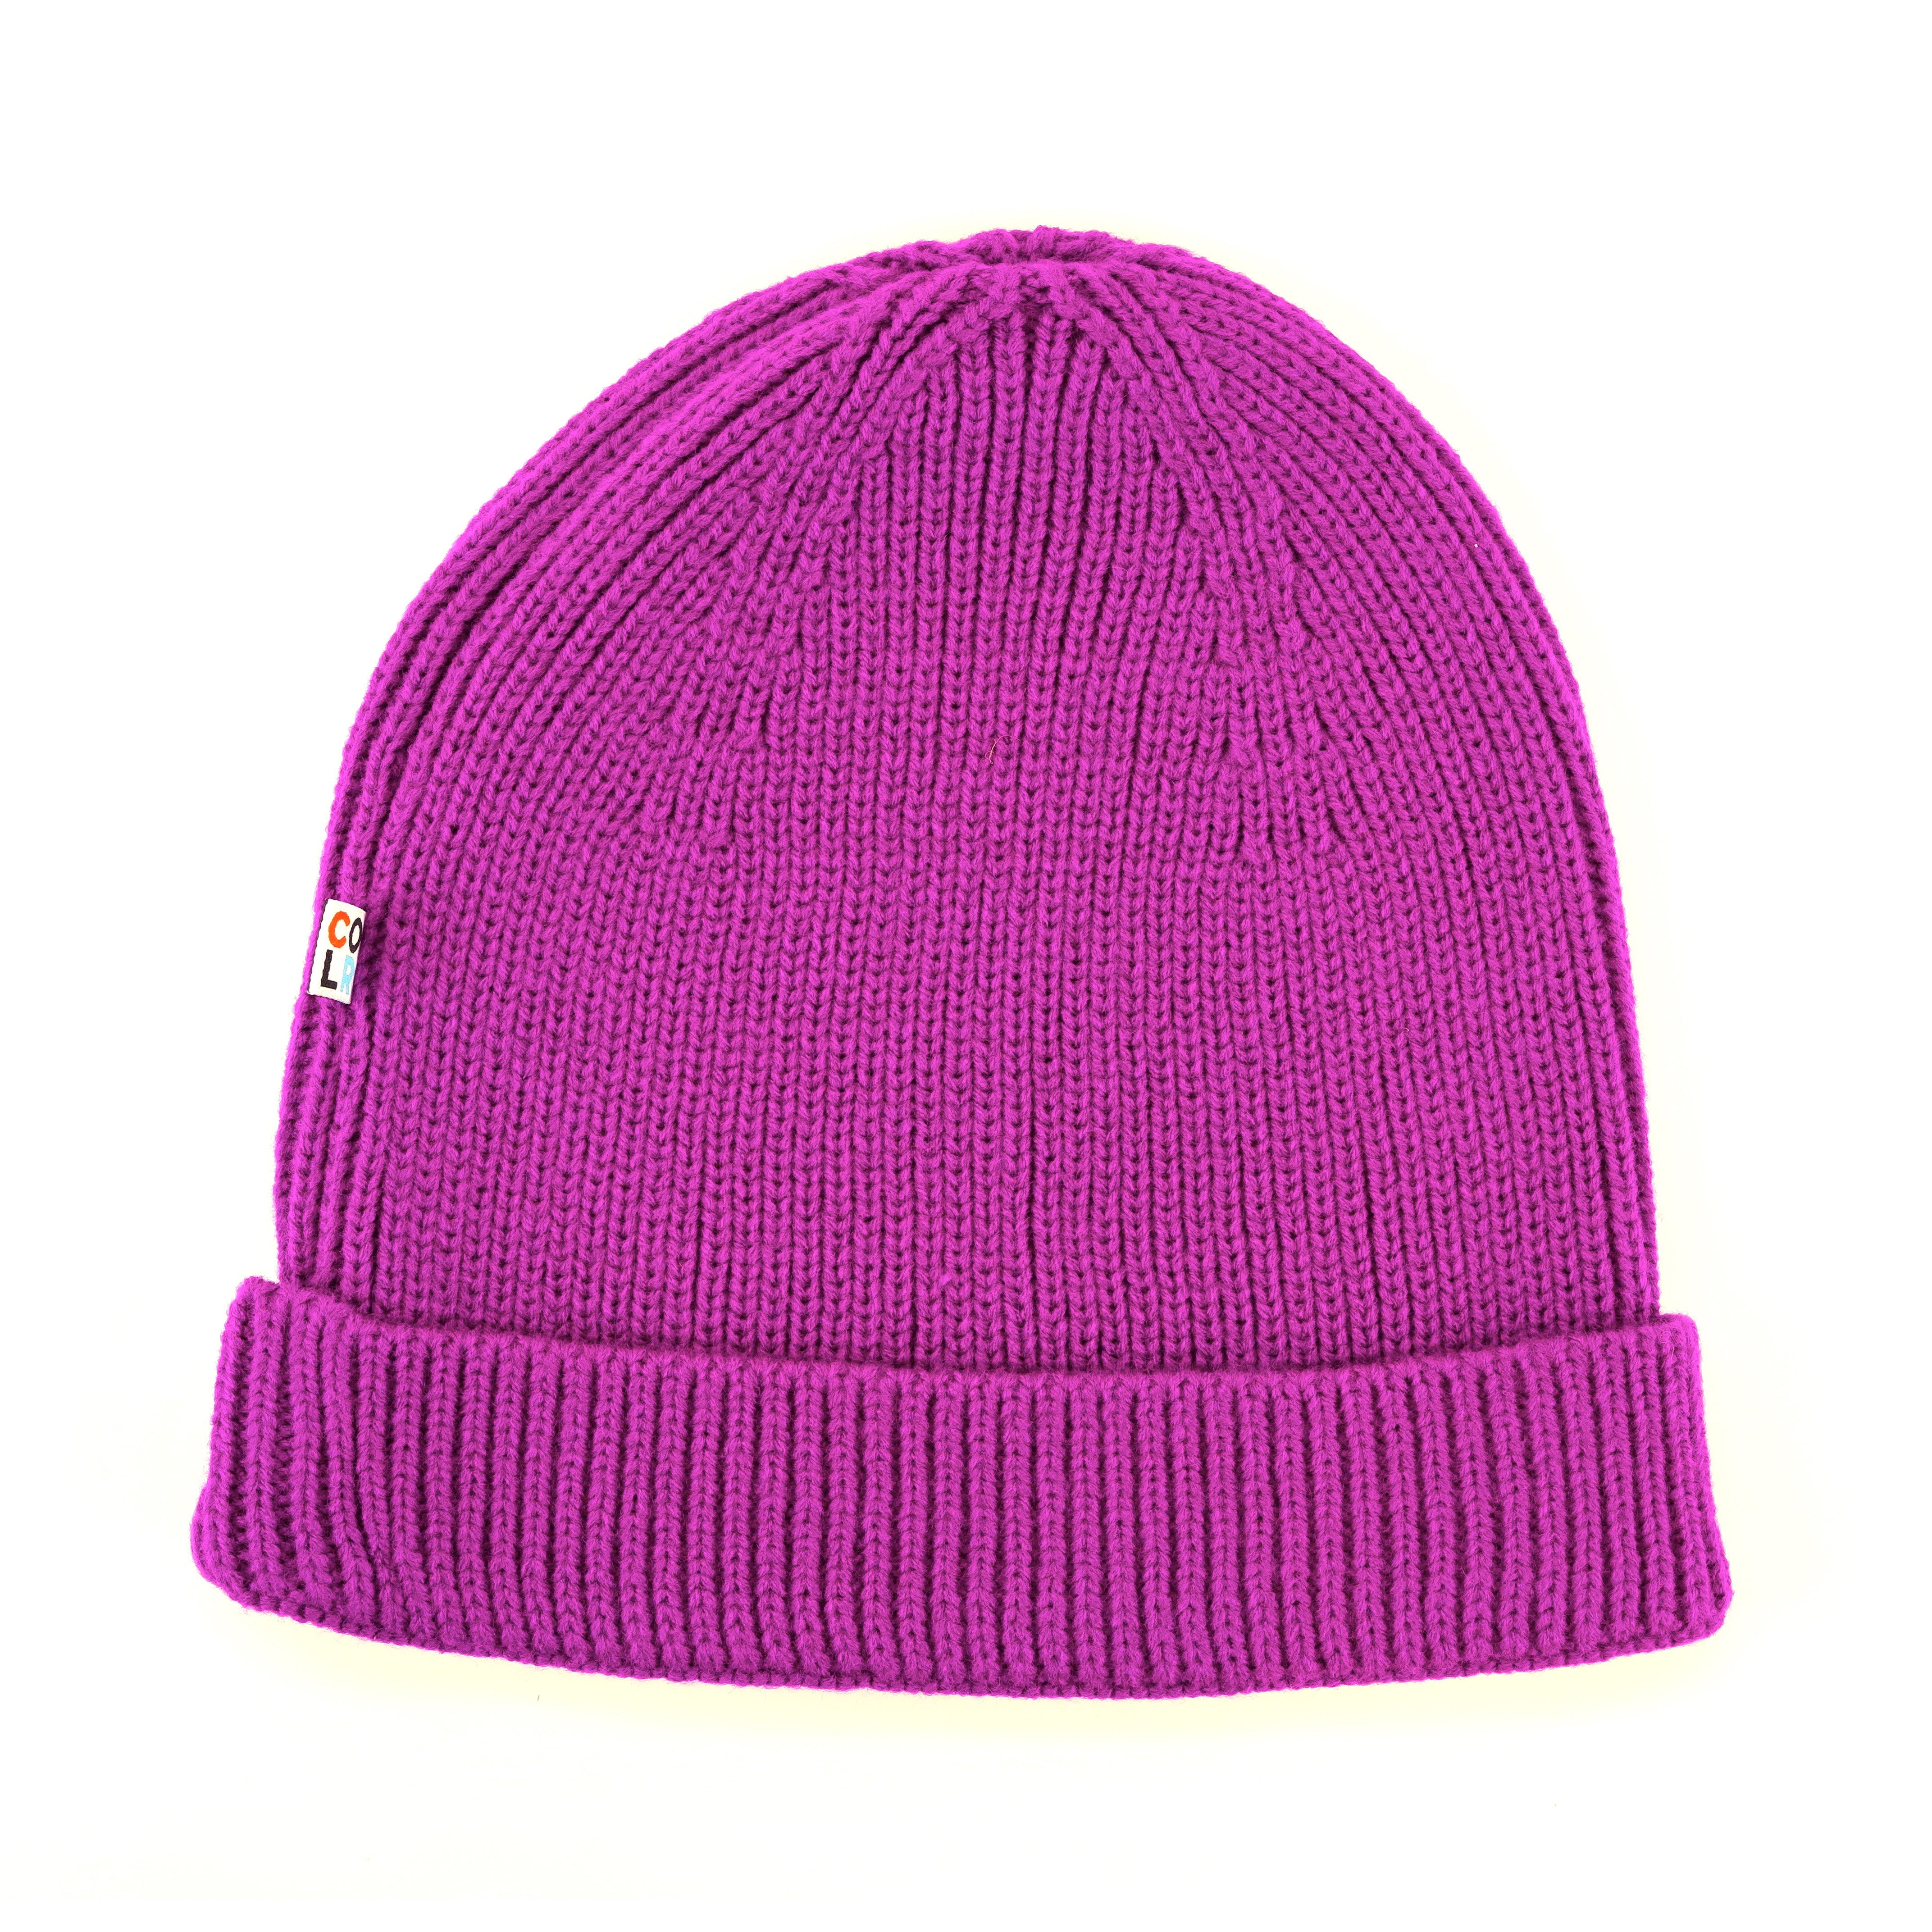 COLR by uLace Beanie - Plum